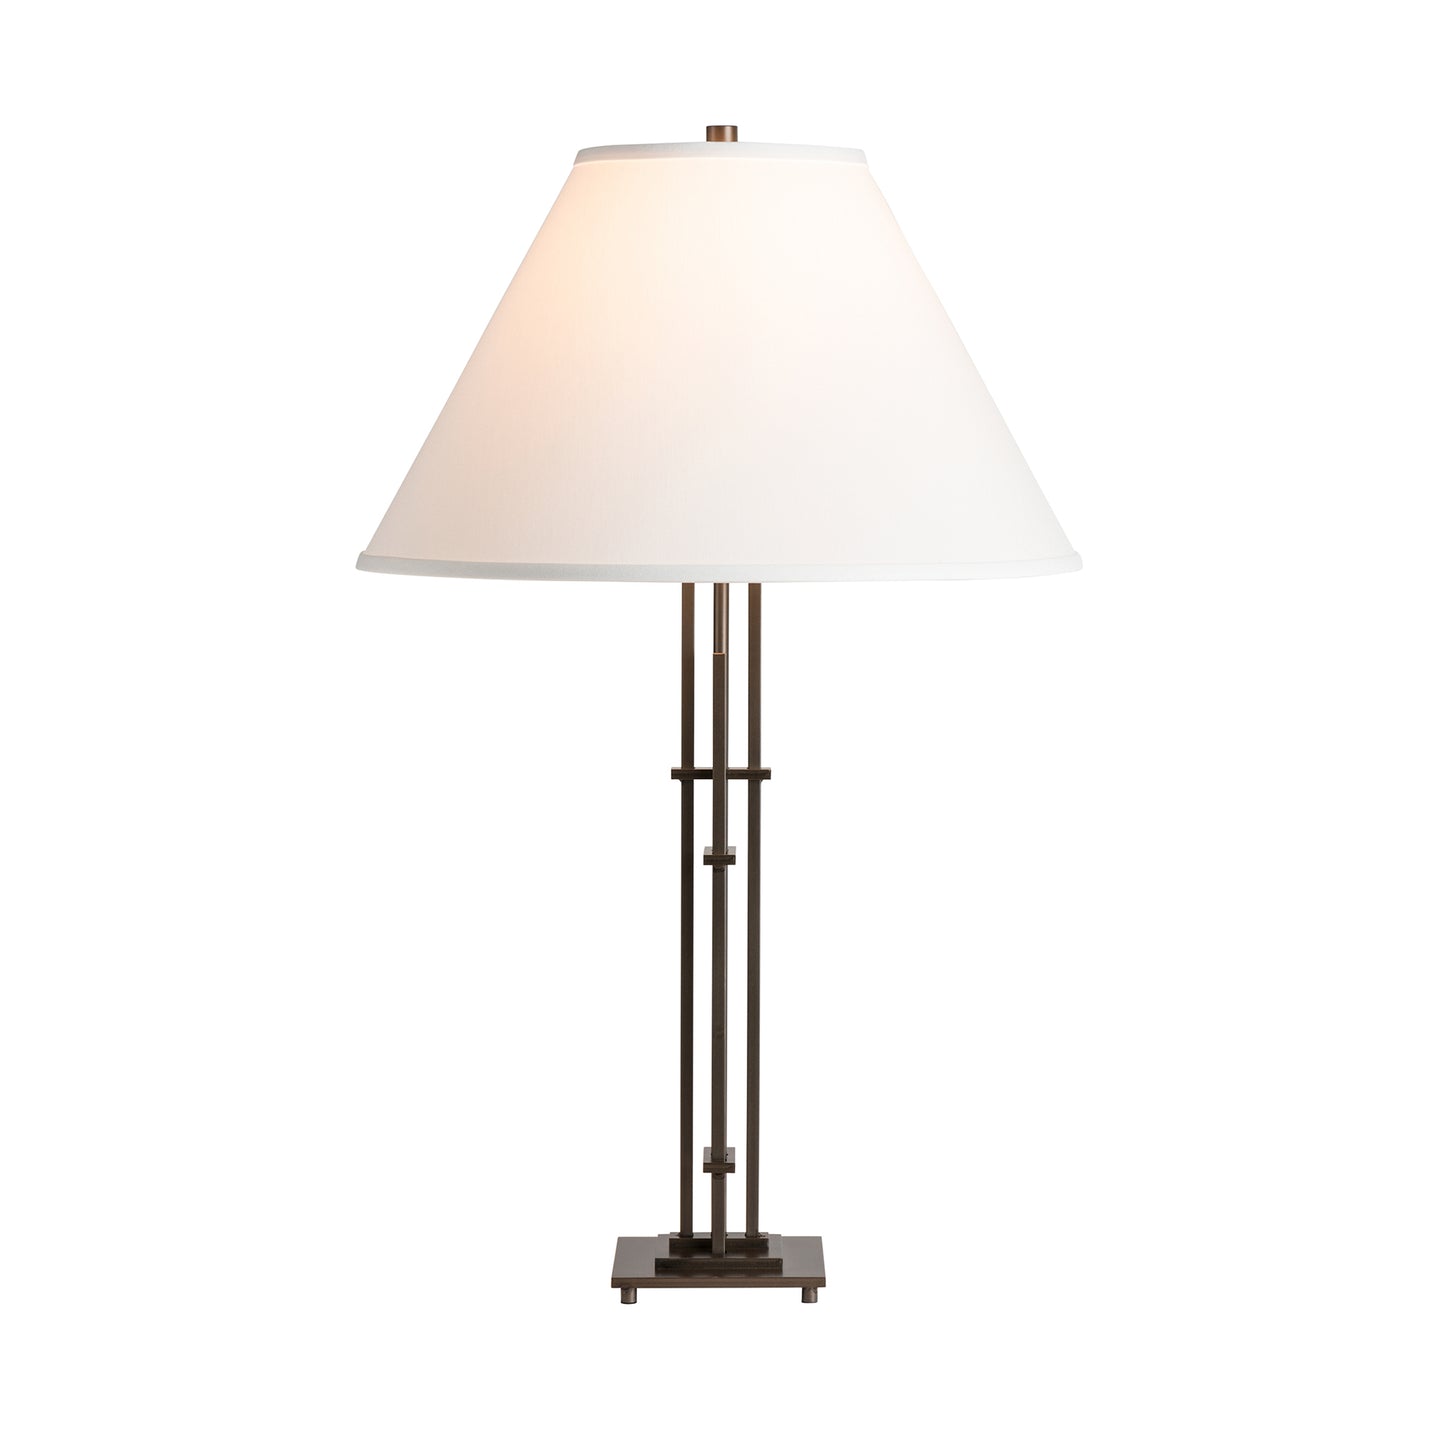 The Hubbardton Forge Metra Quad Table Lamp features a contemporary style design with a white shade.